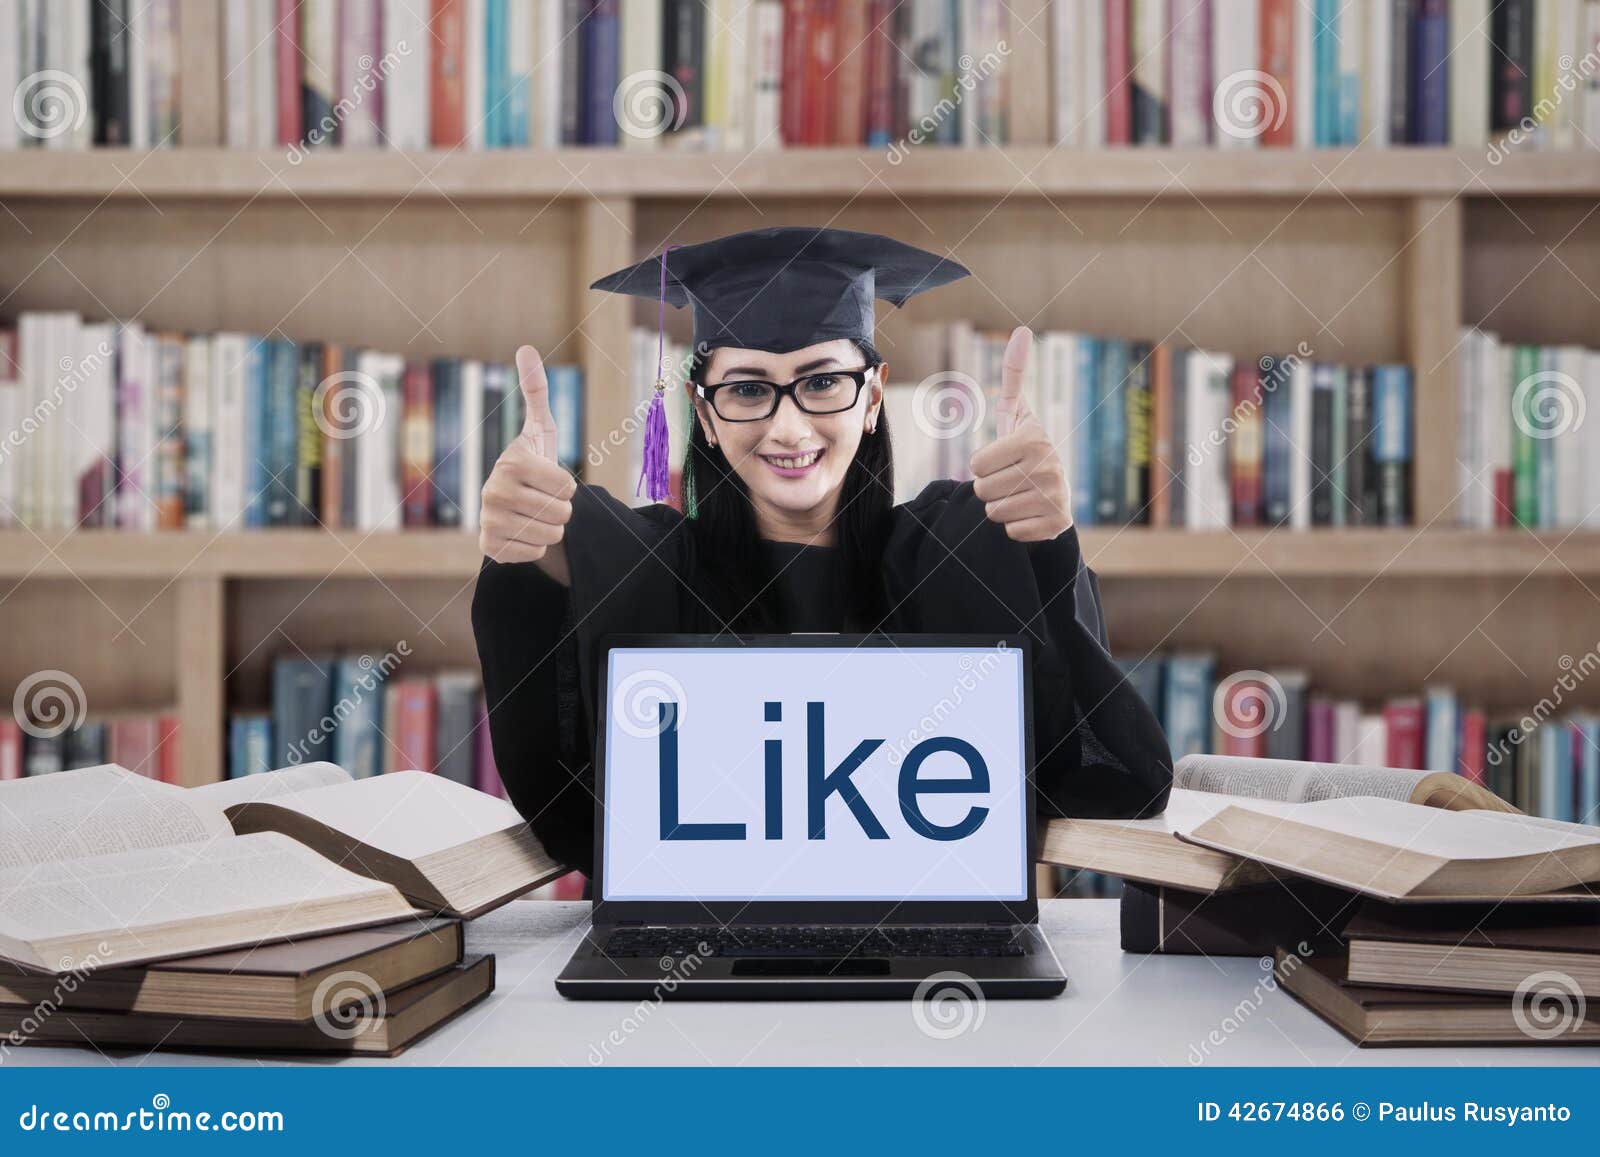 Female Graduate Thumbs Up in Library Stock Photo photo image